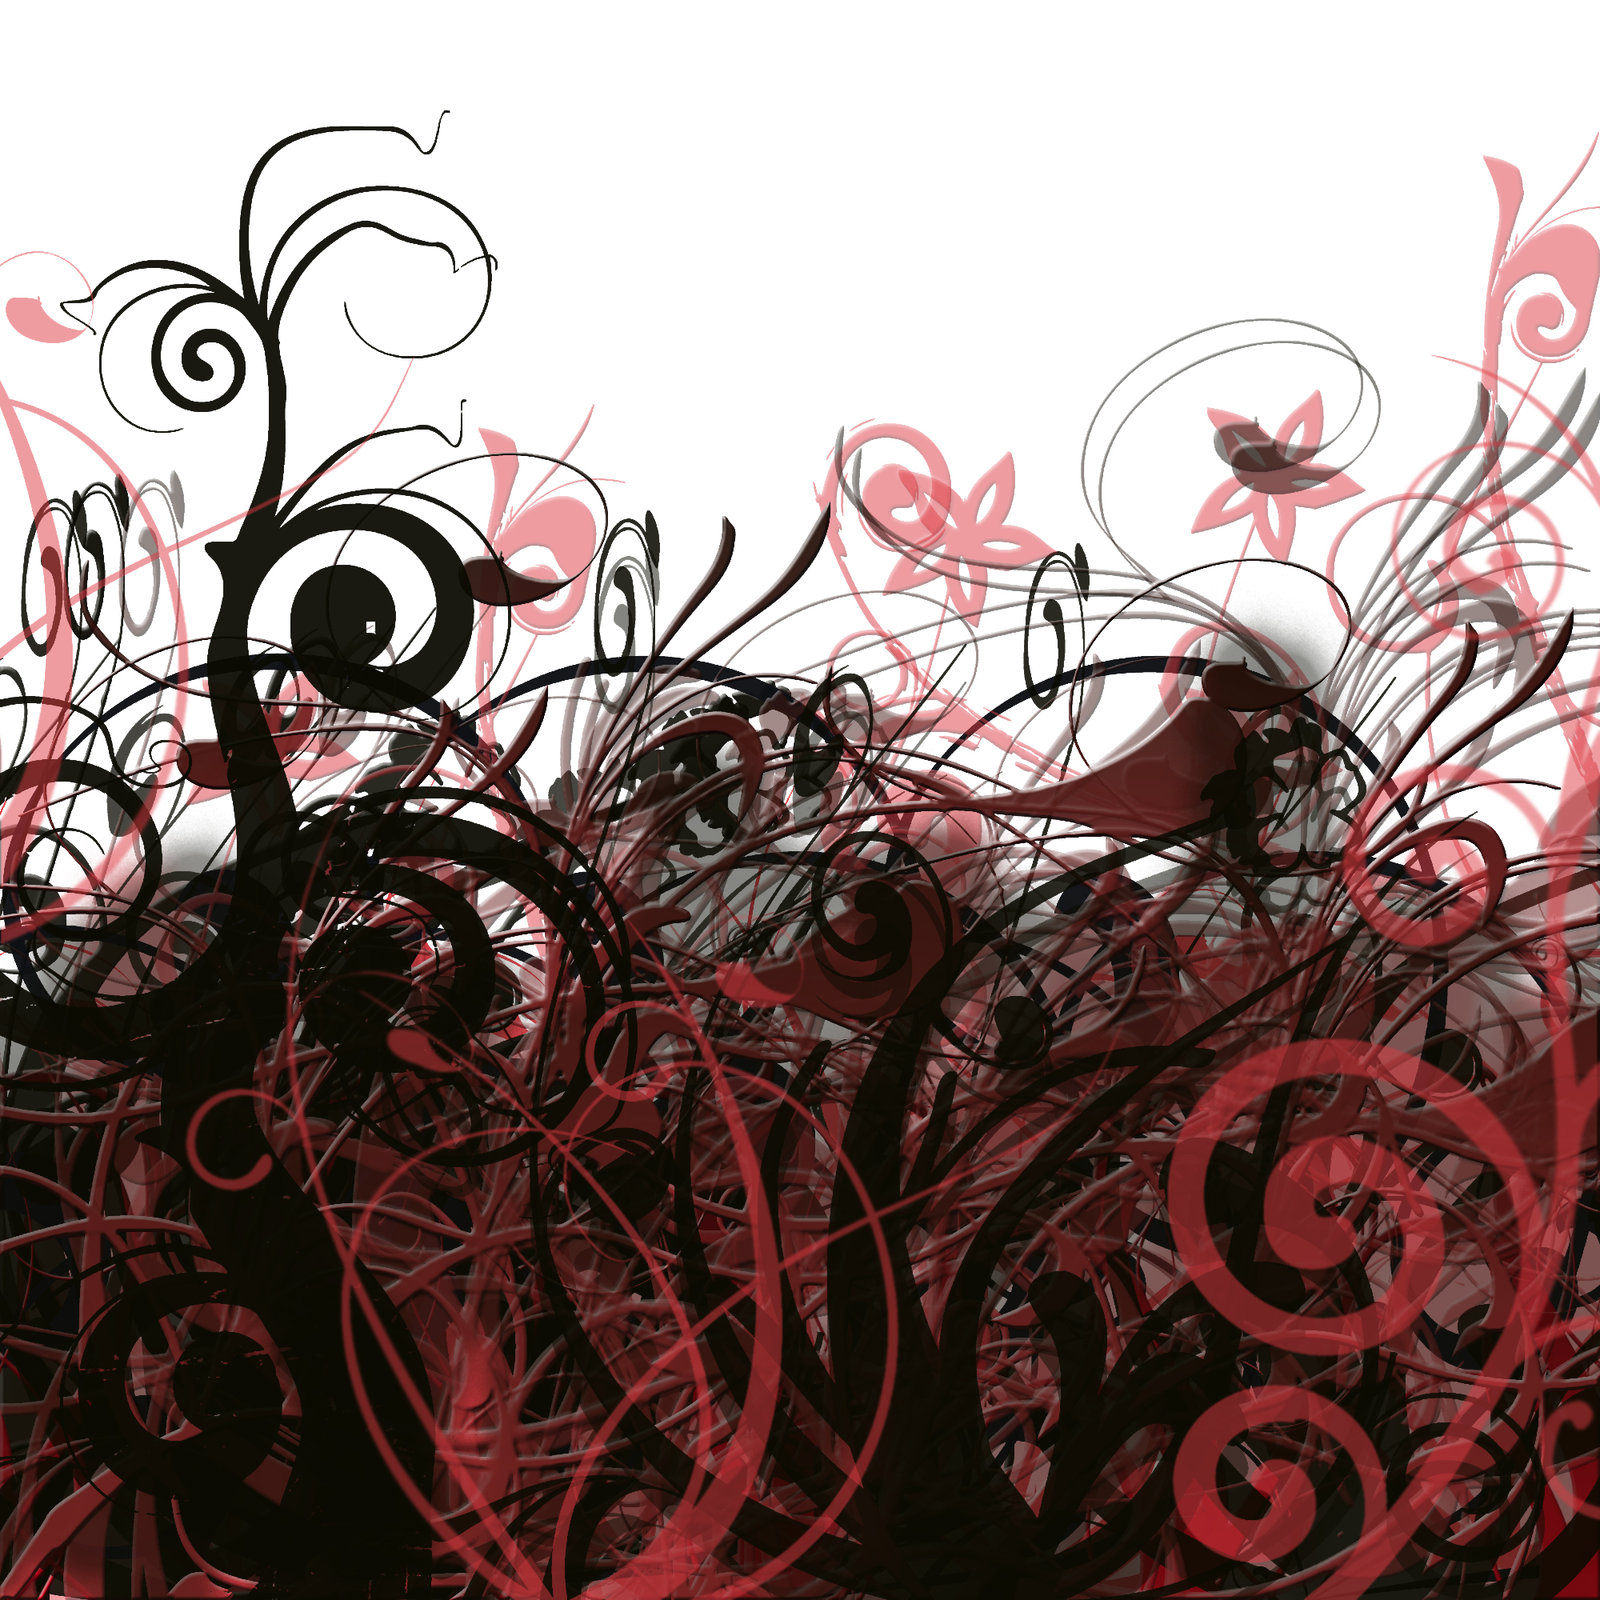 Red Black Abstract by skull-wing on DeviantArt